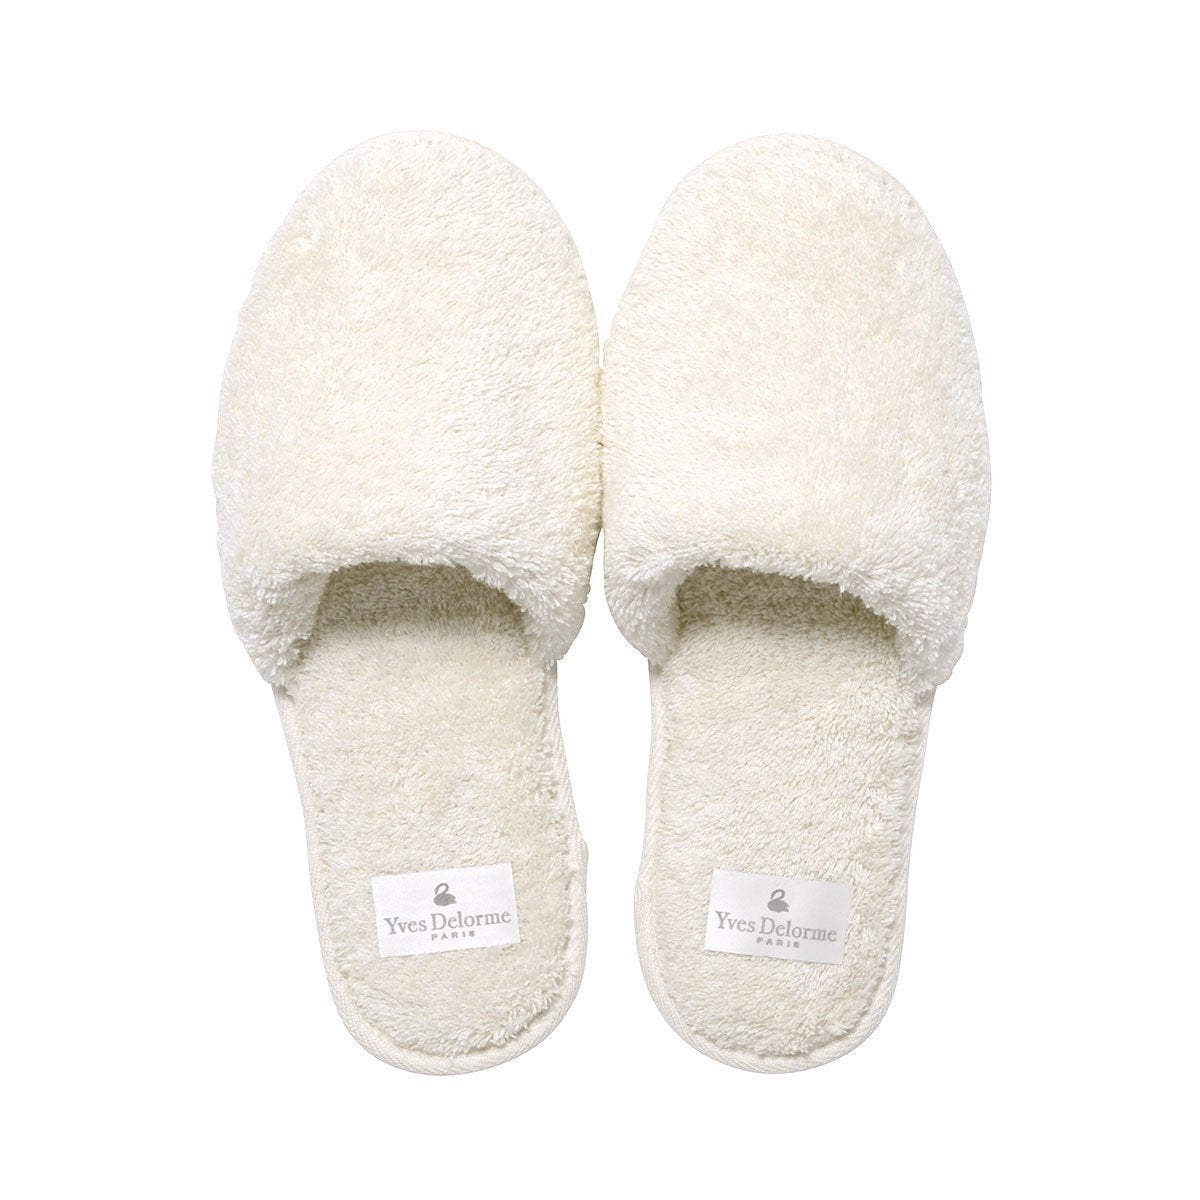 Etoile Nacre Women's Slippers by Yves Delorme | Fig Linens - Ivory slippers